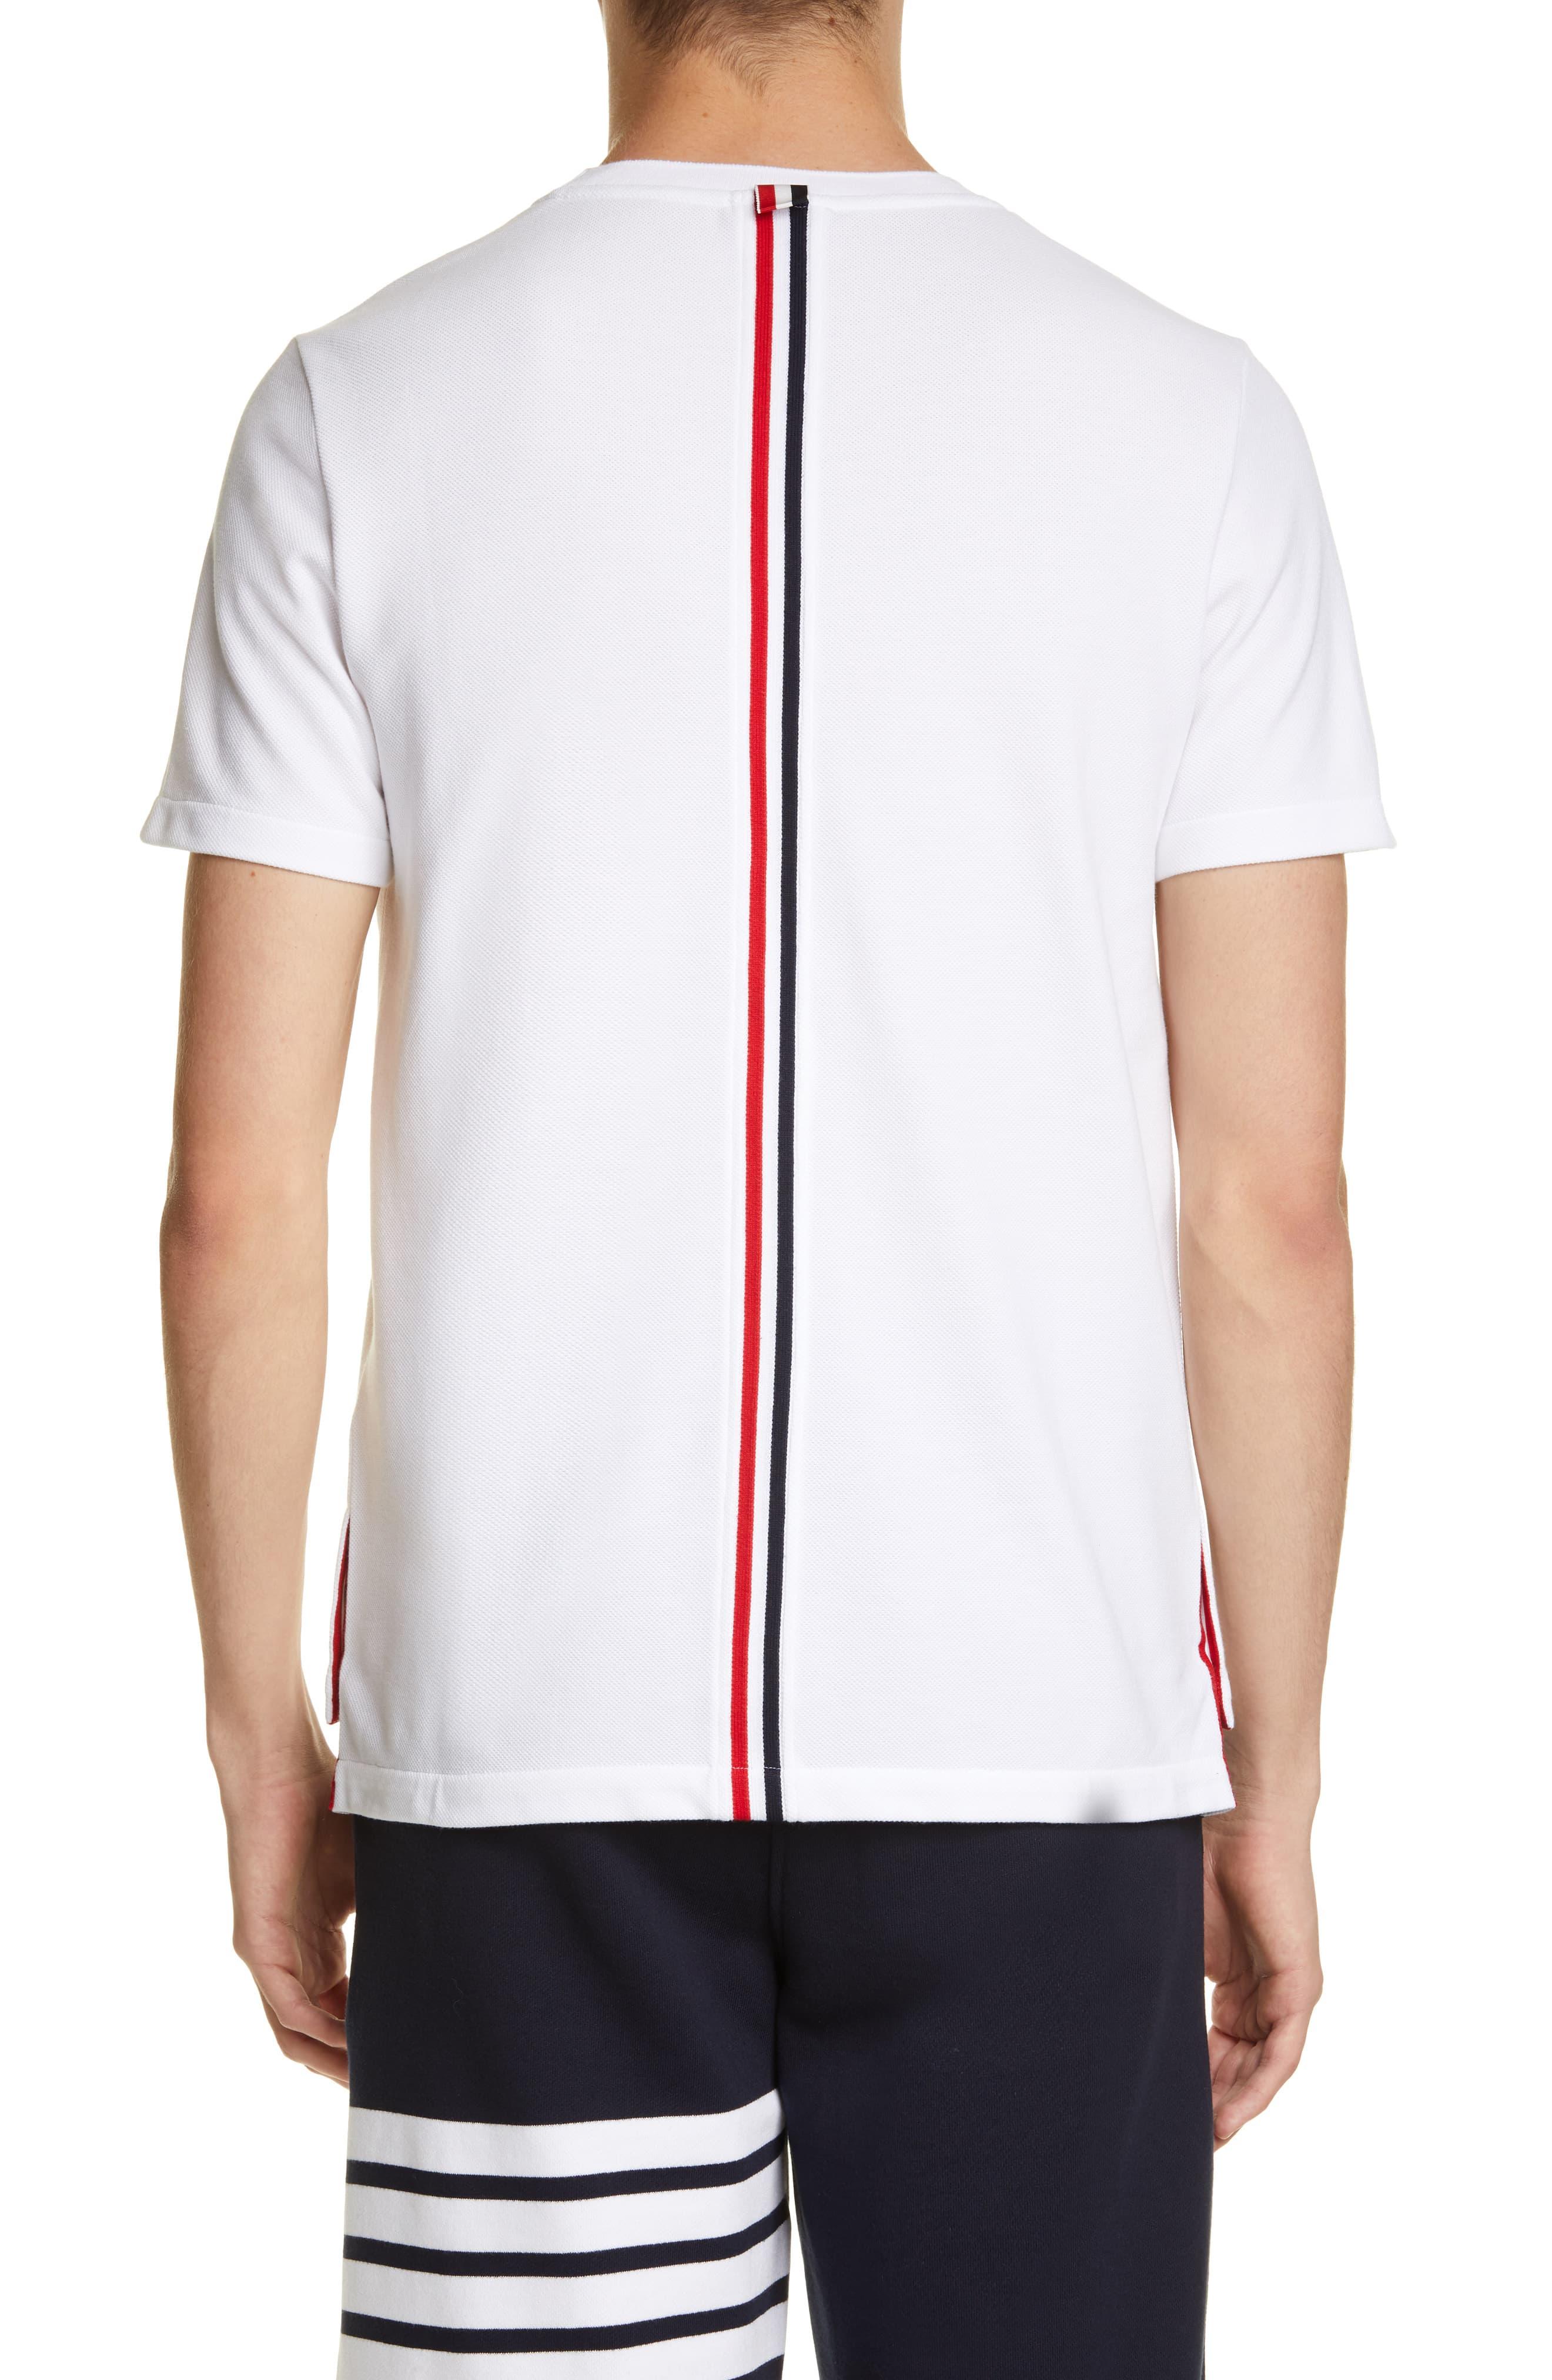 Thom Browne Cotton Stripe Crewneck T-shirt in White for Men - Lyst